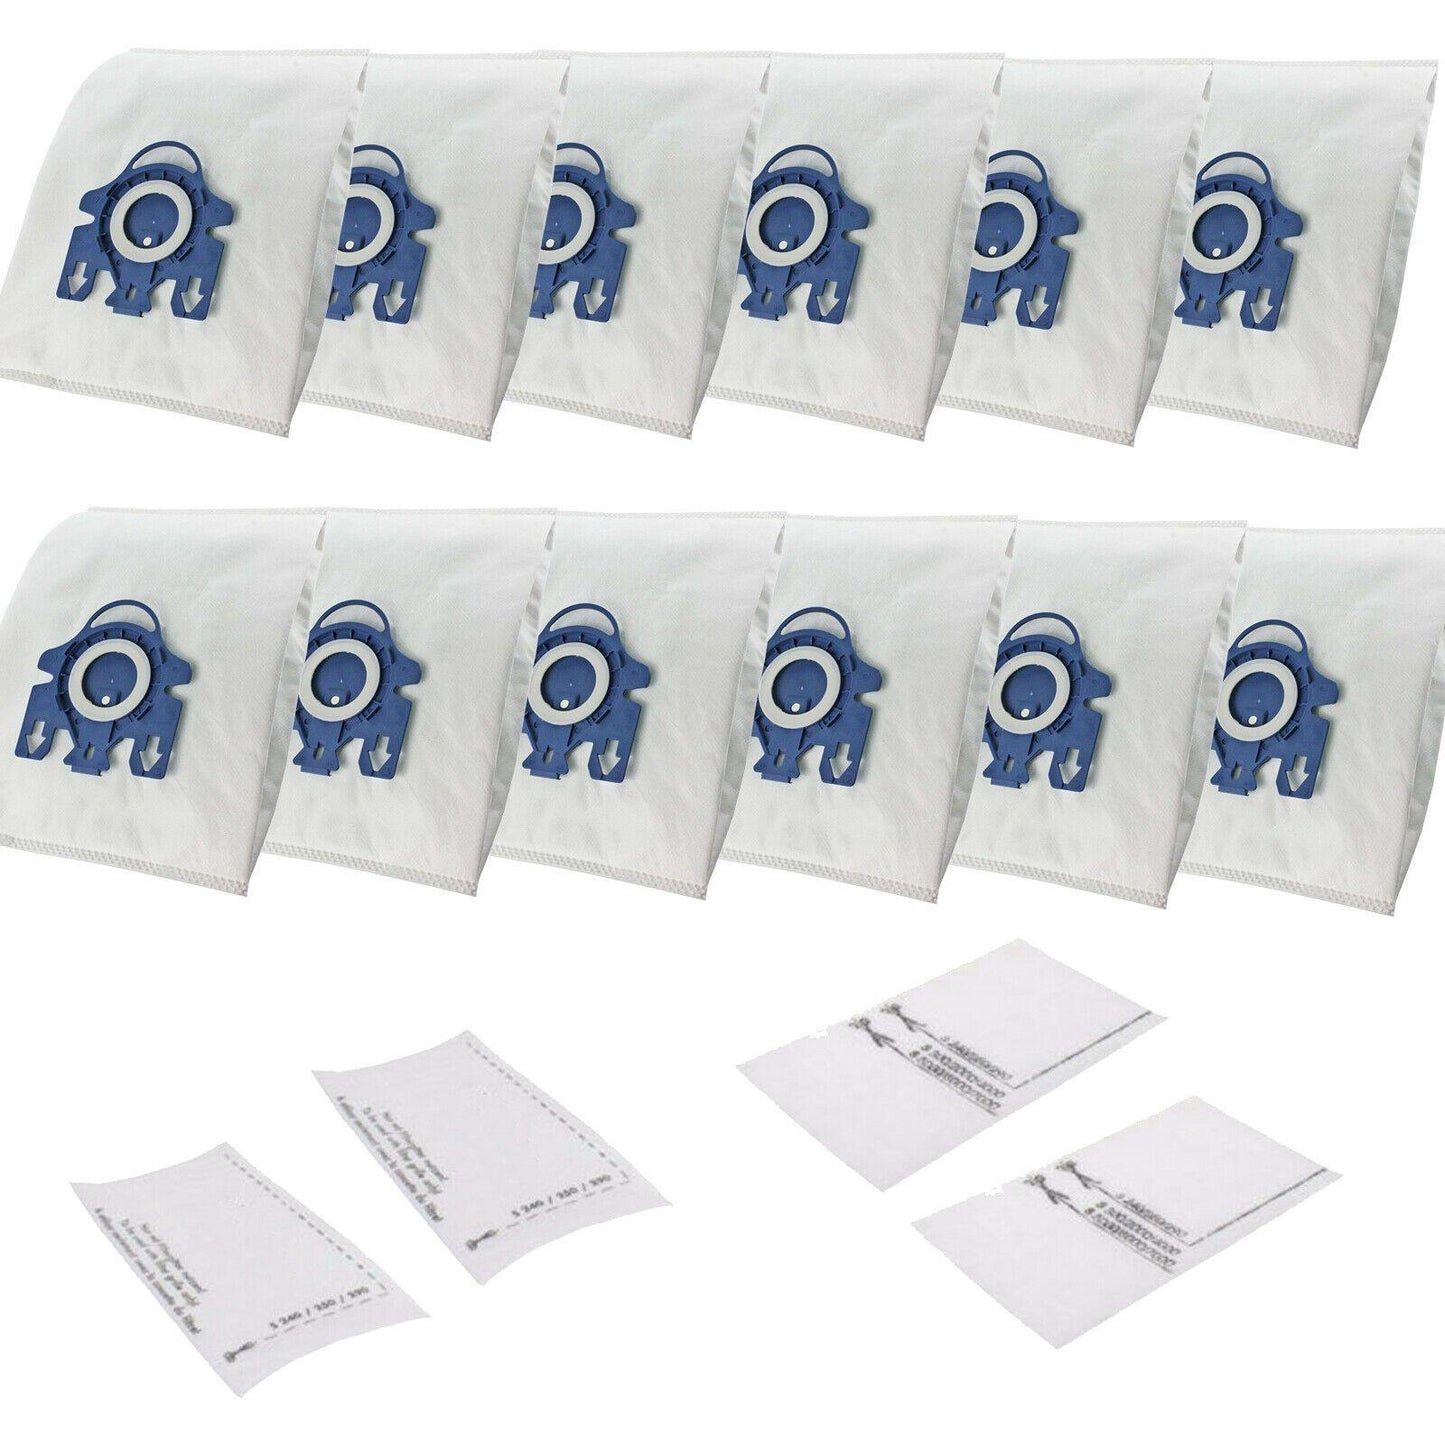 12 Synthetic Vacuum Bag + 8 Filter For Miele S5780 S5781 S5980 S8320 S8330 S8340 Sparesbarn